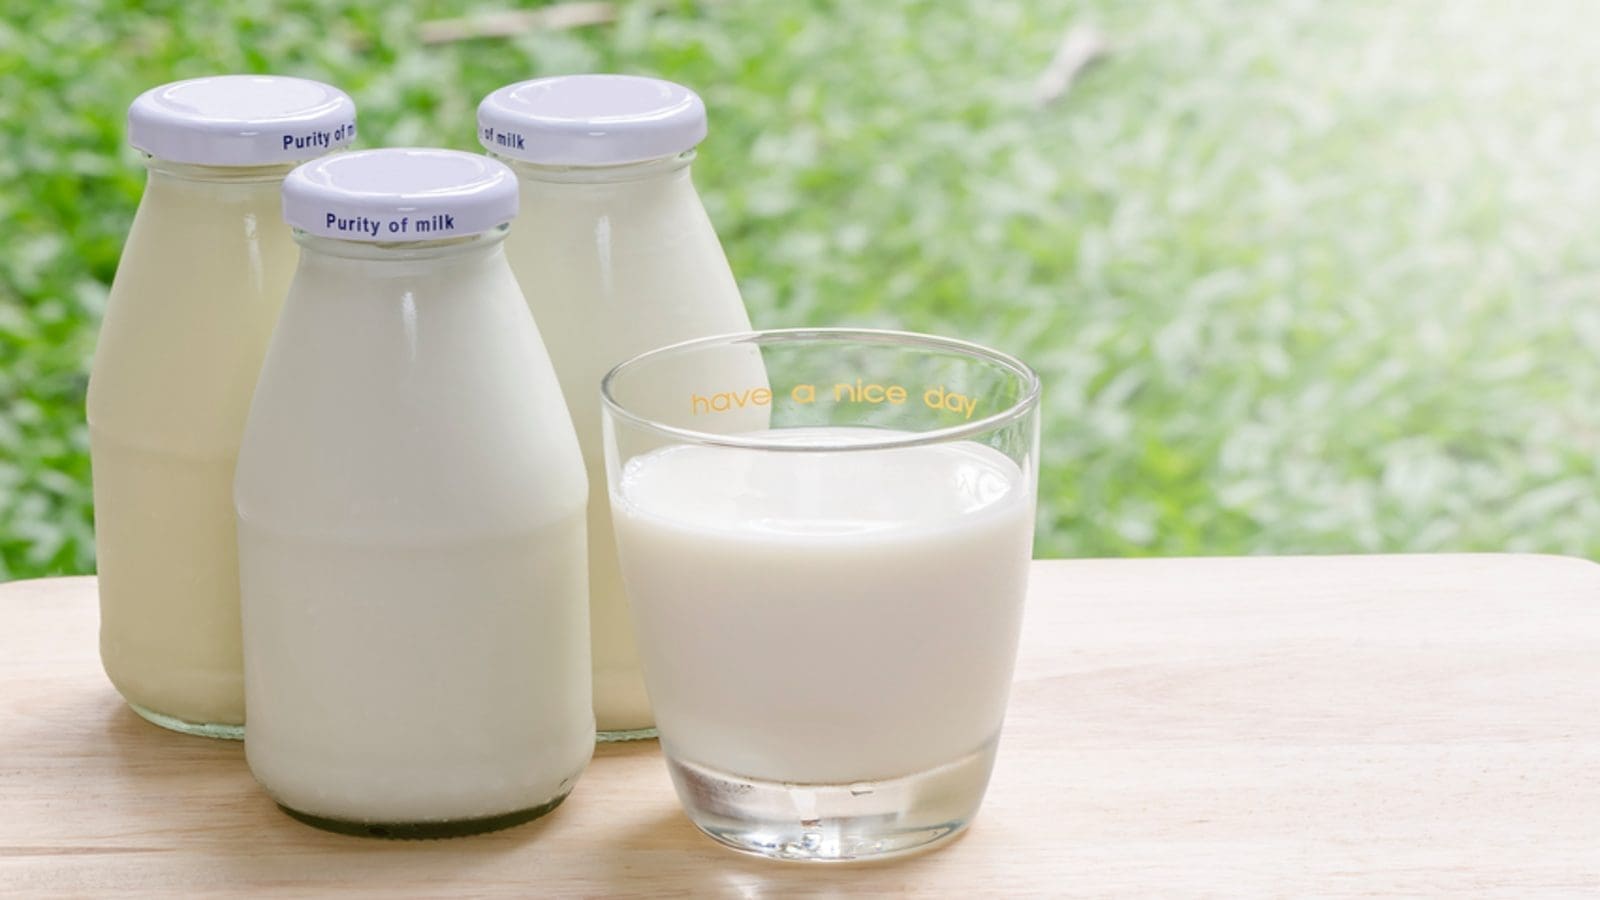 Dairibord reports 28.5 million litres of utilised raw milk, records 40% increase in revenue